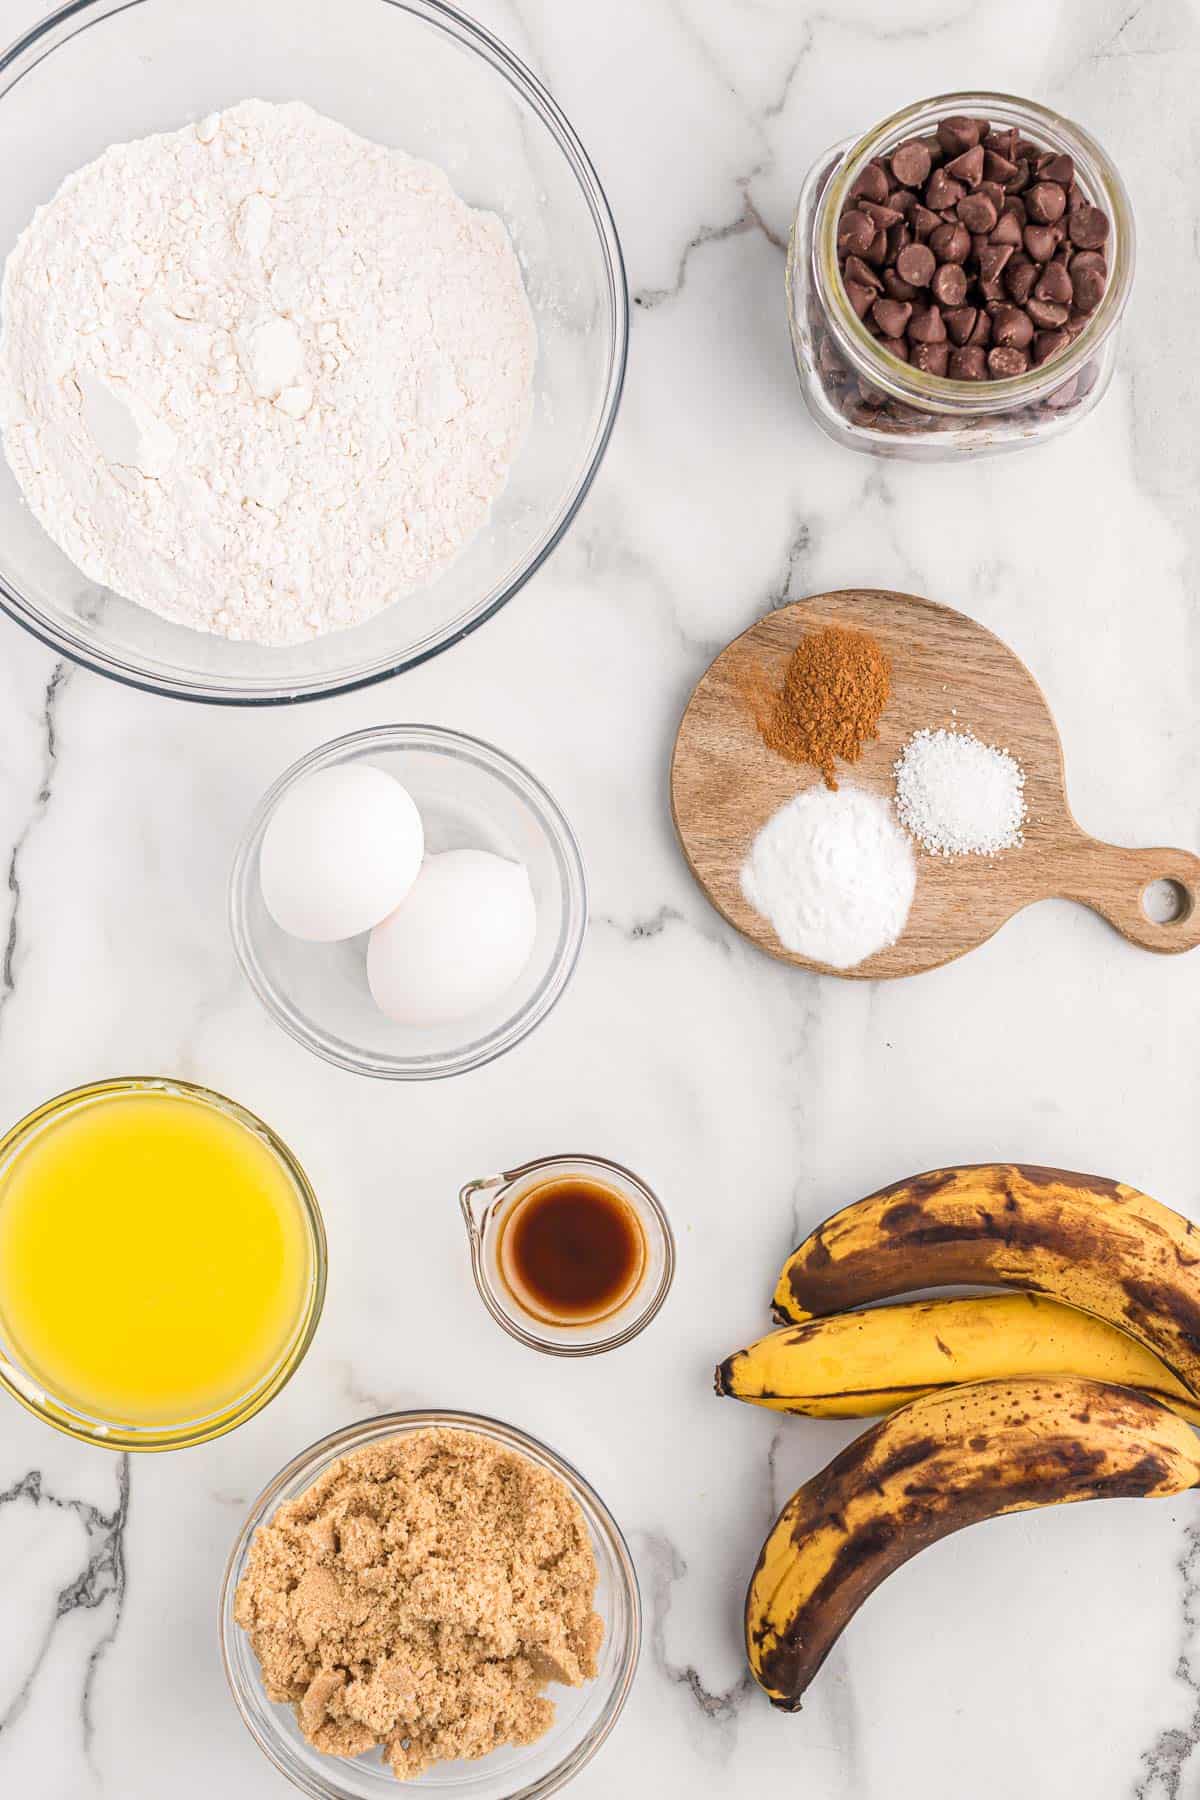 ingredients needed to make banana bread with chocolate chips